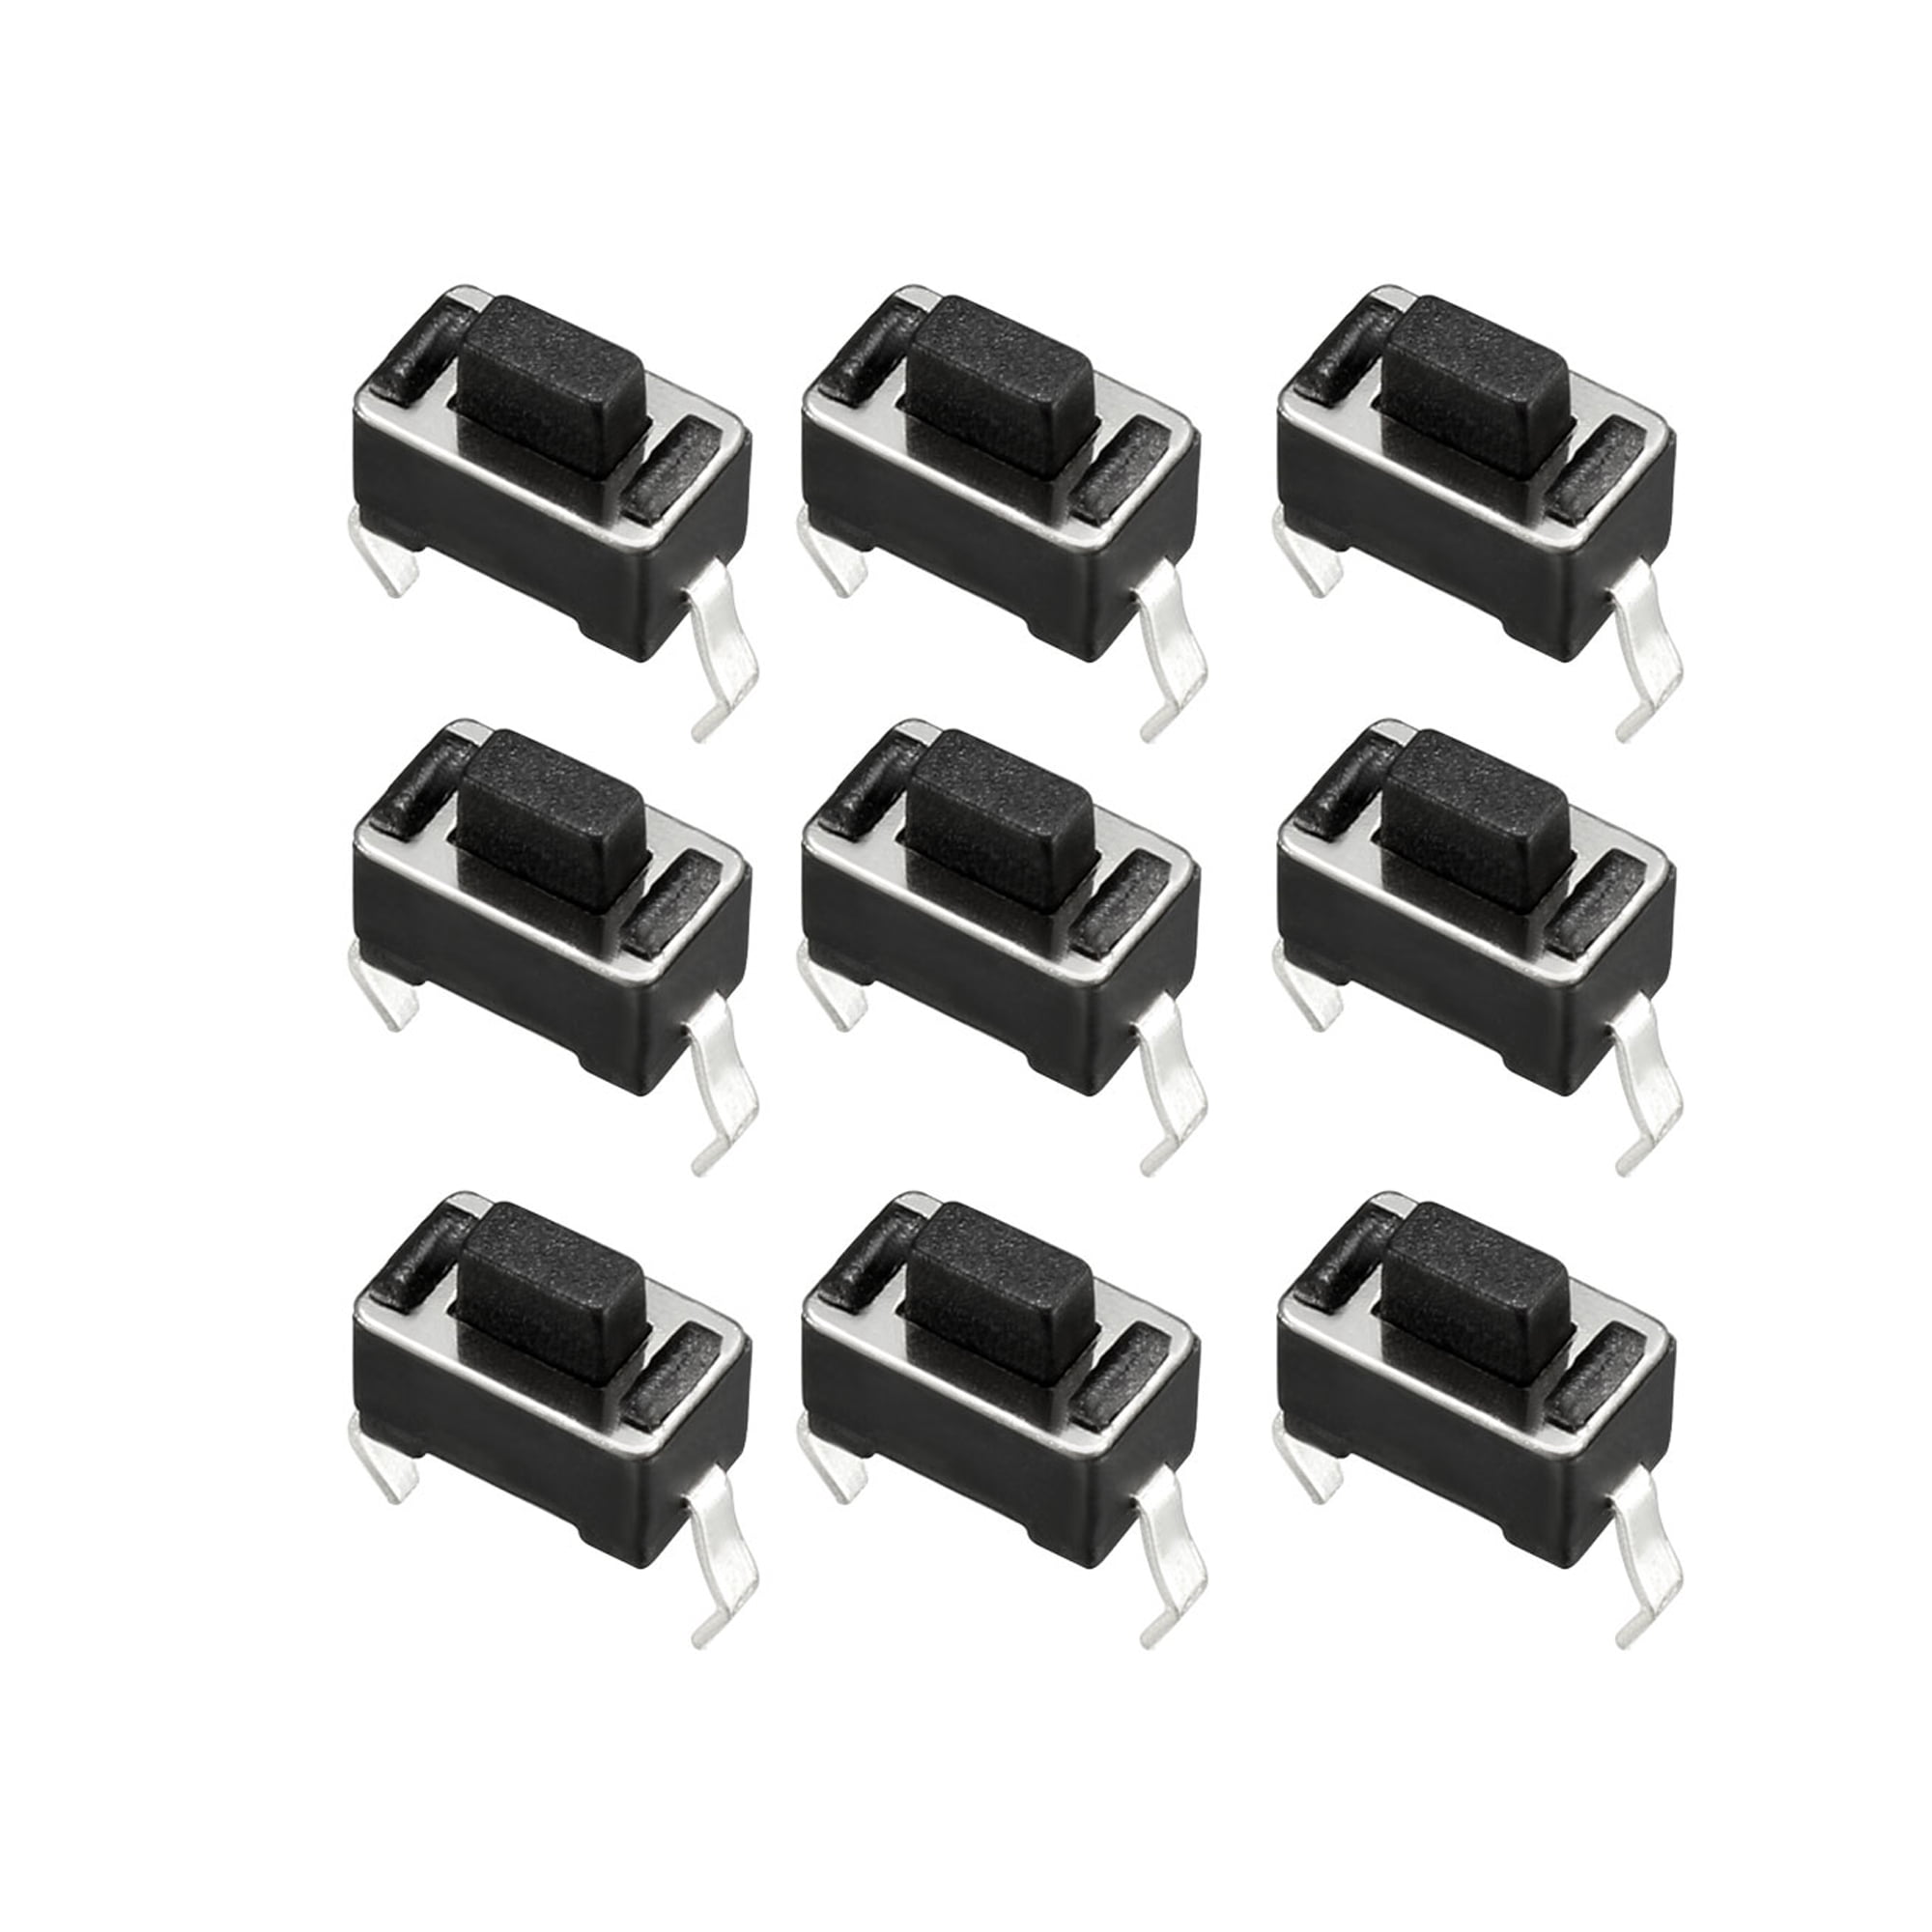 35PCS 5x5x1.5mm Momentary Panel PCB SMD SMT Push Button SPST Tactile Tact Switch